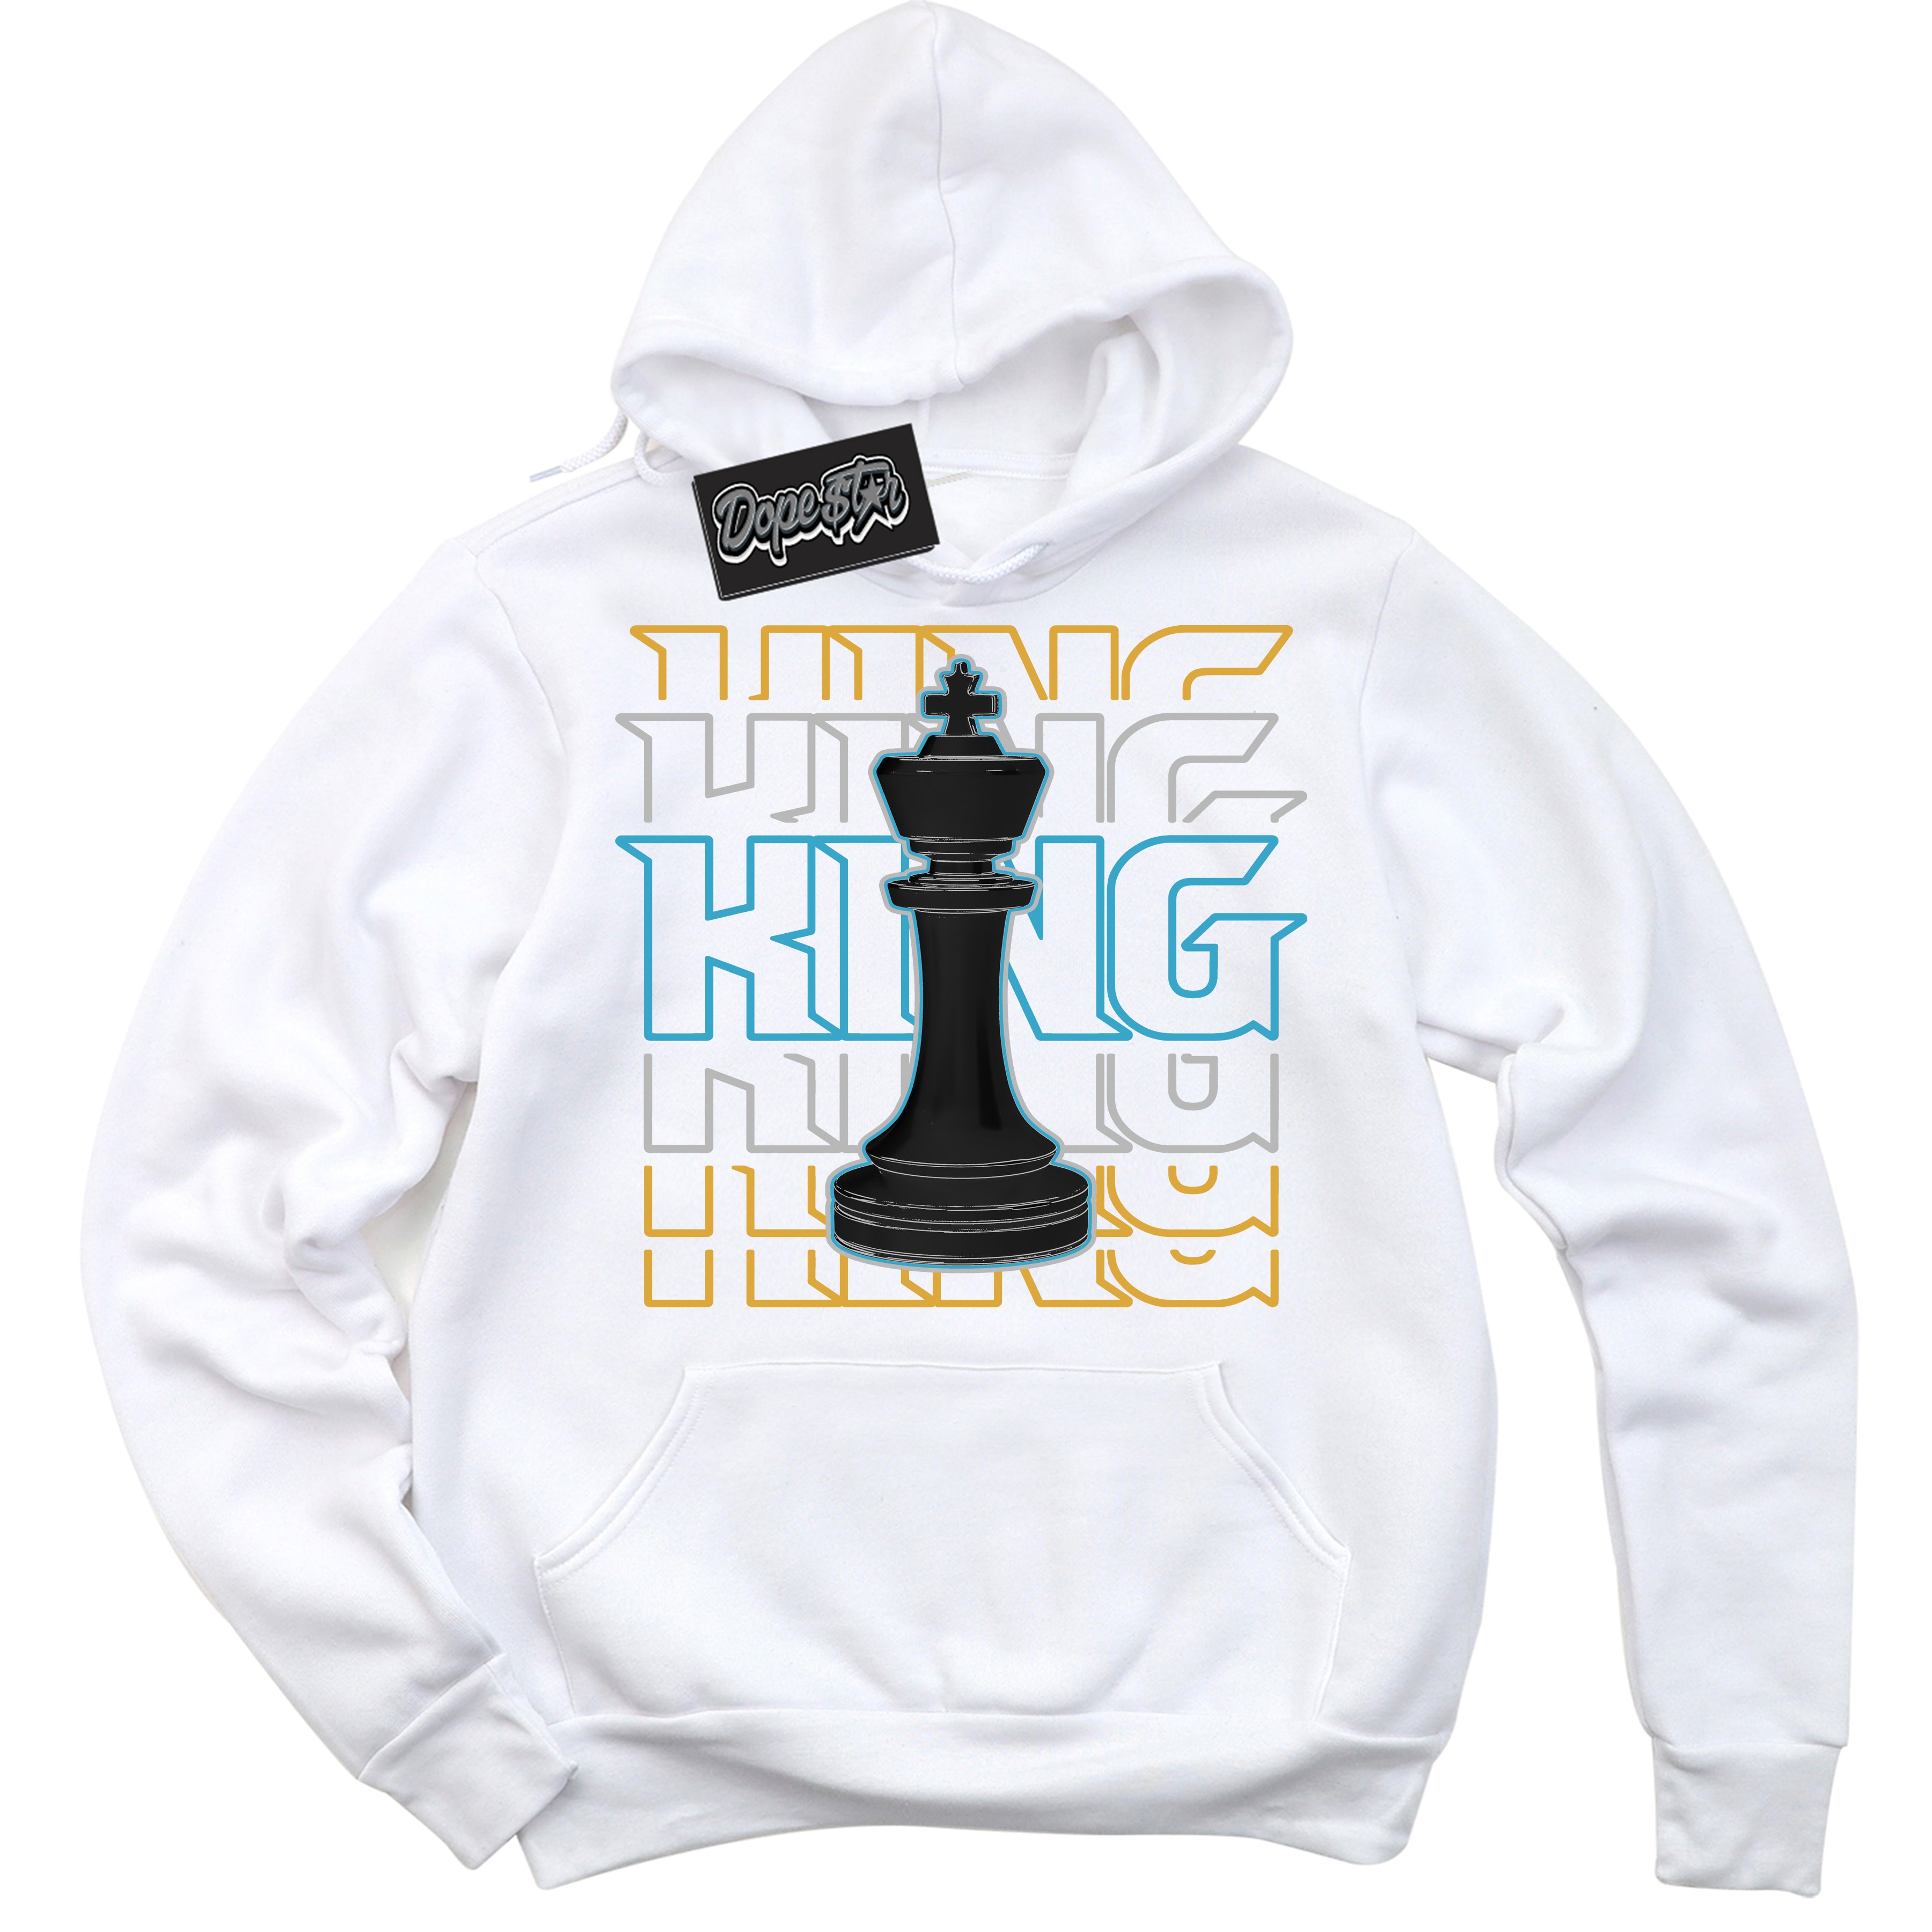 Cool White Hoodie with “ King Chess ”  design that Perfectly Matches Aqua 5s Sneakers.